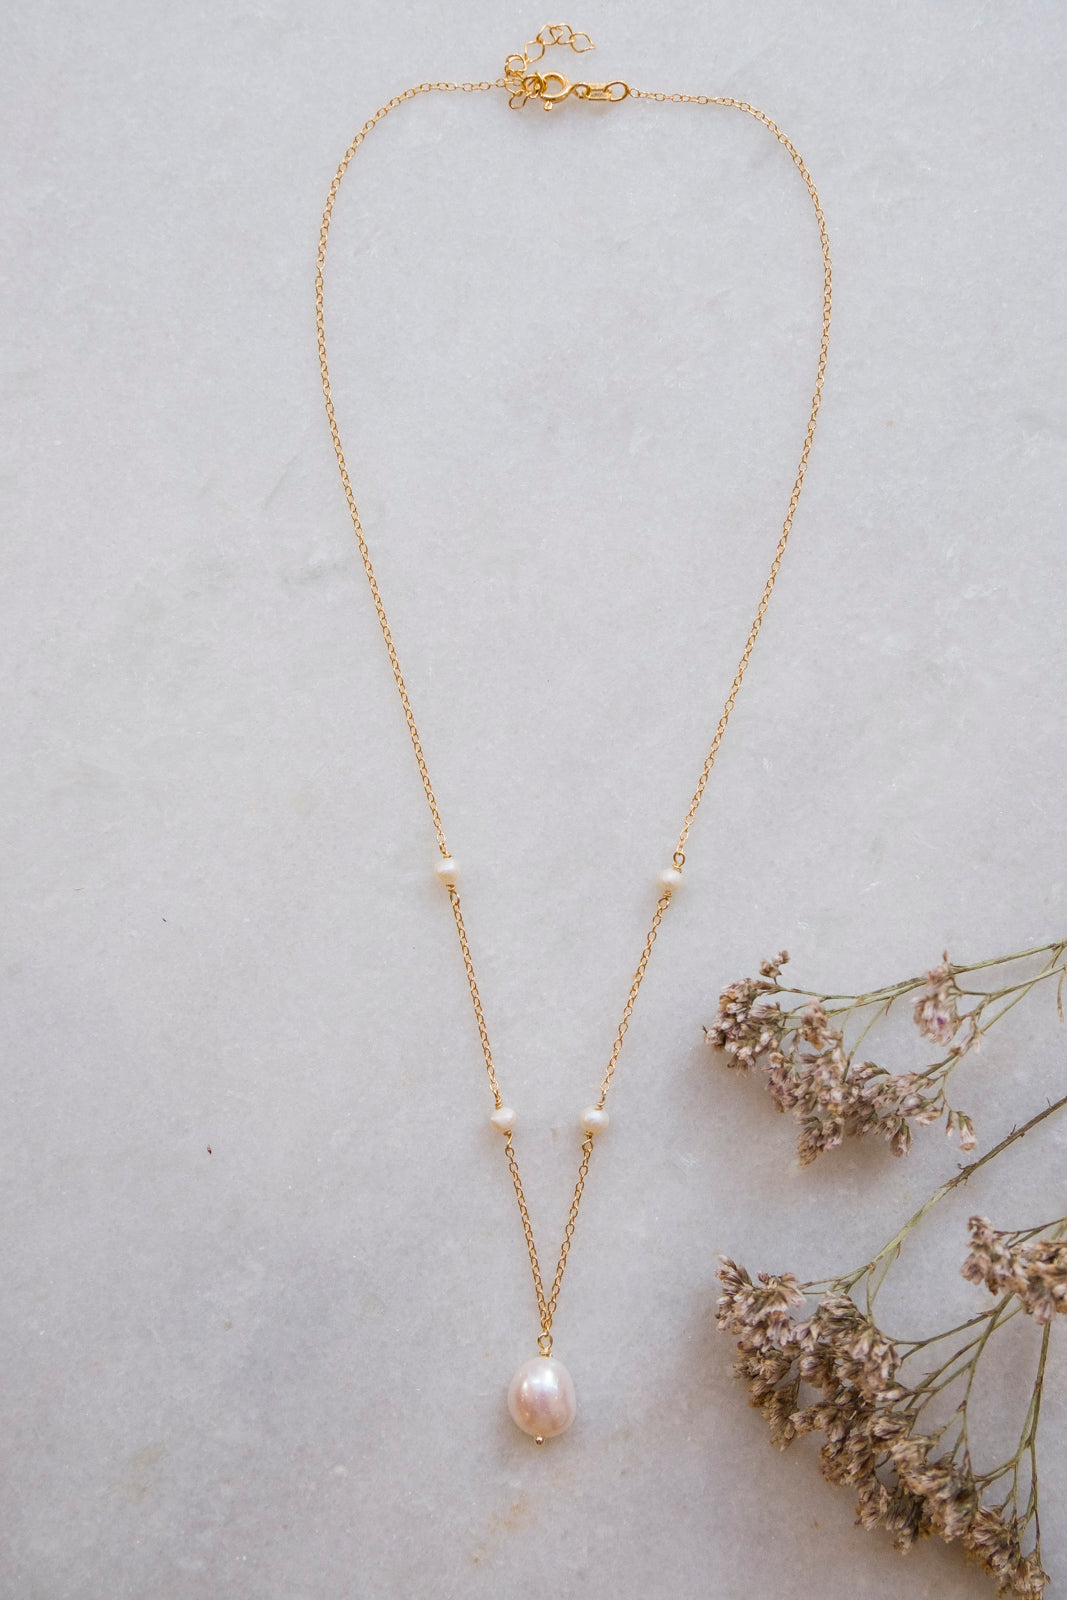 5 pearls necklace